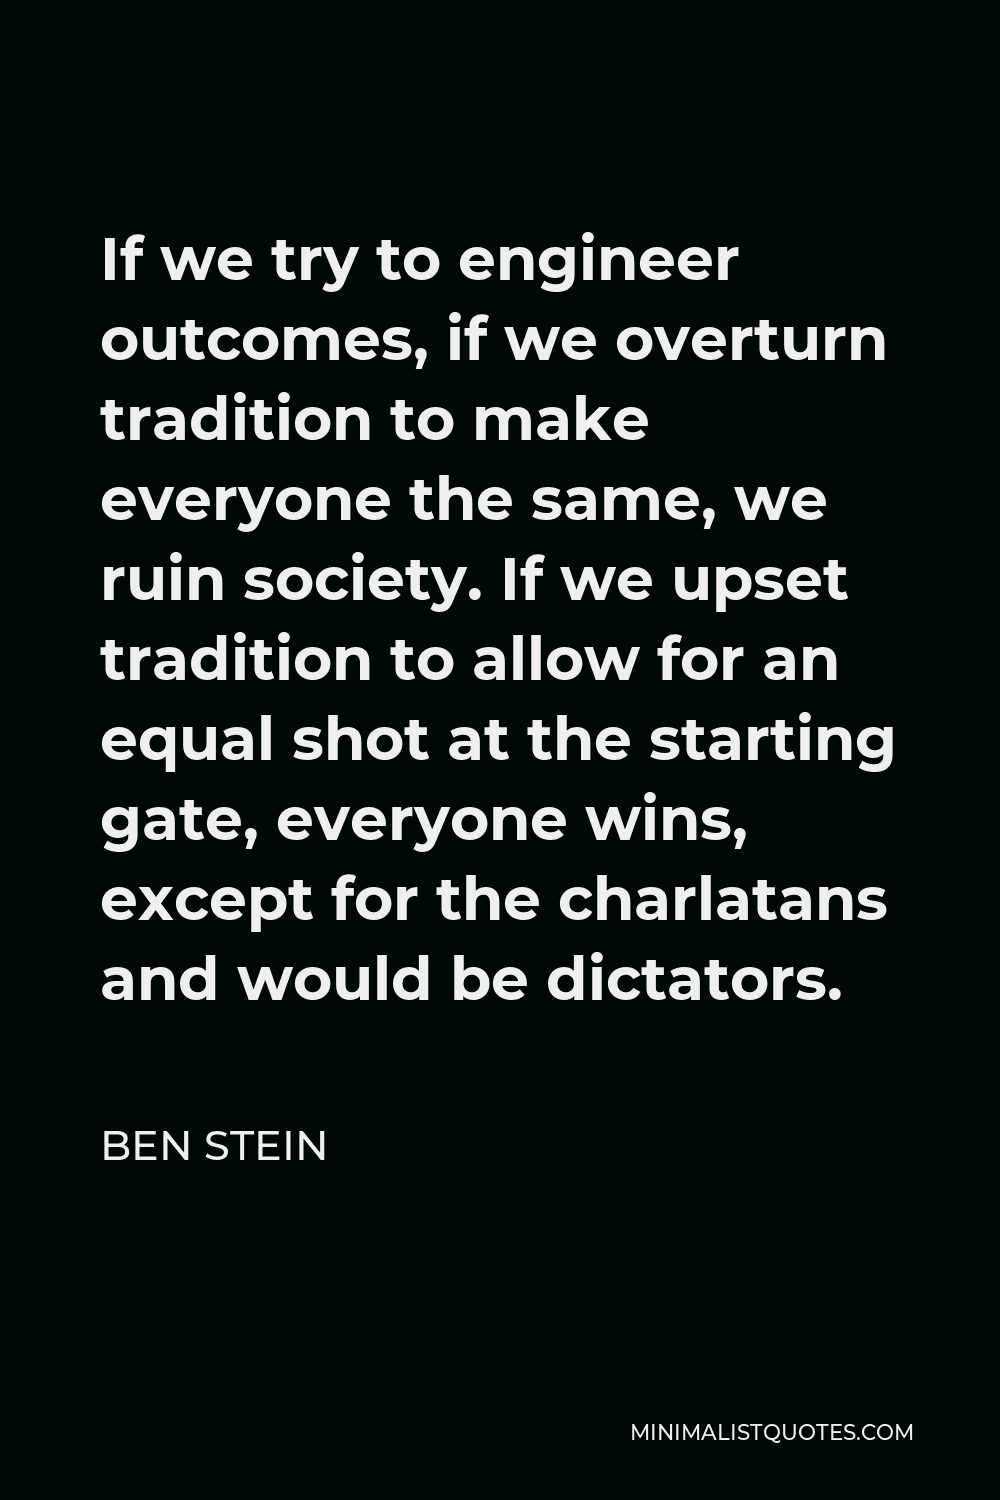 Ben Stein Quote - If we try to engineer outcomes, if we overturn tradition to make everyone the same, we ruin society. If we upset tradition to allow for an equal shot at the starting gate, everyone wins, except for the charlatans and would be dictators.